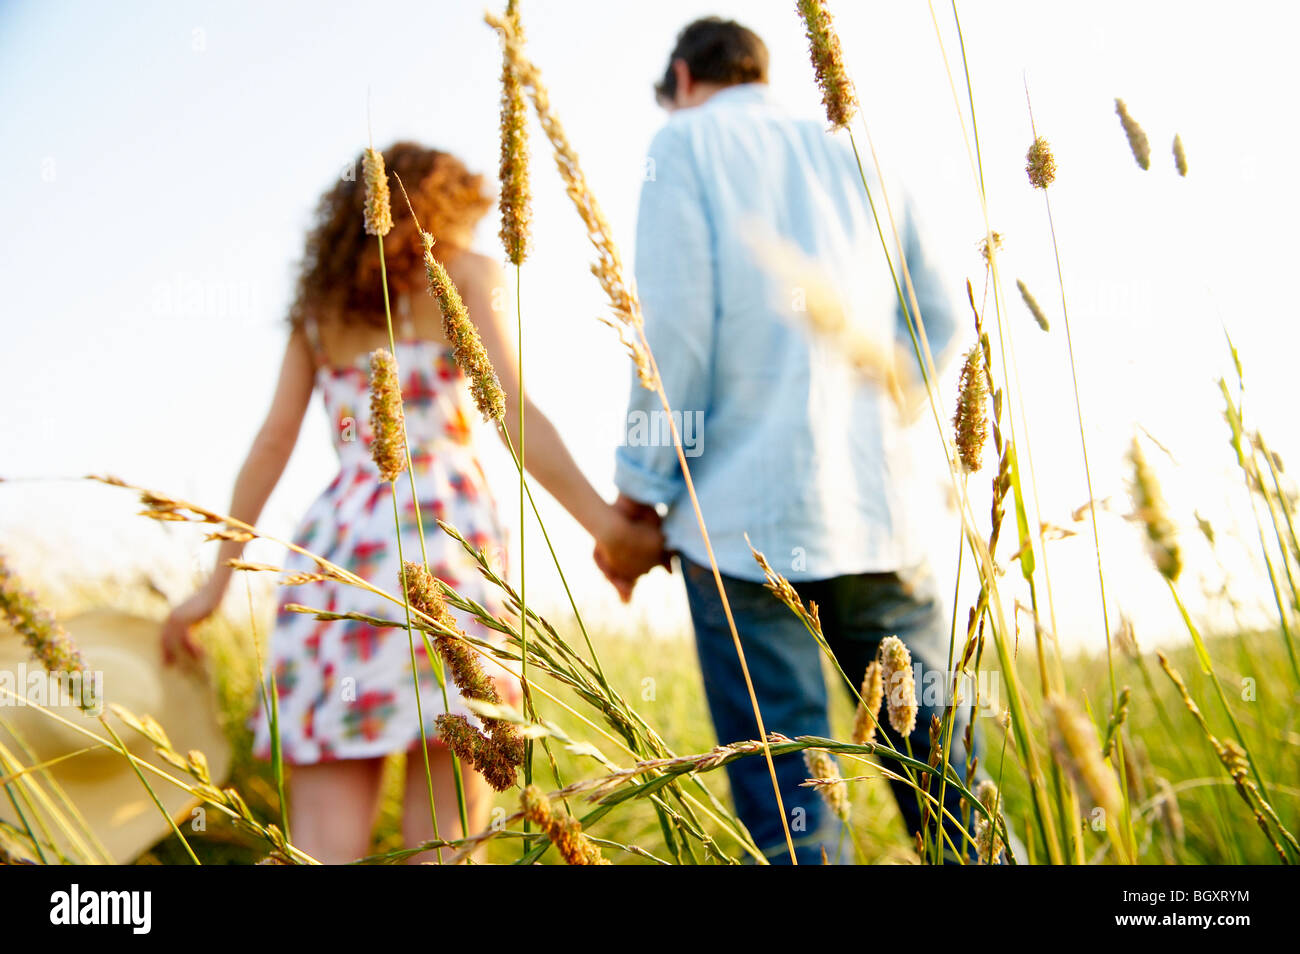 Couple holding hands in a wheat field Stock Photo